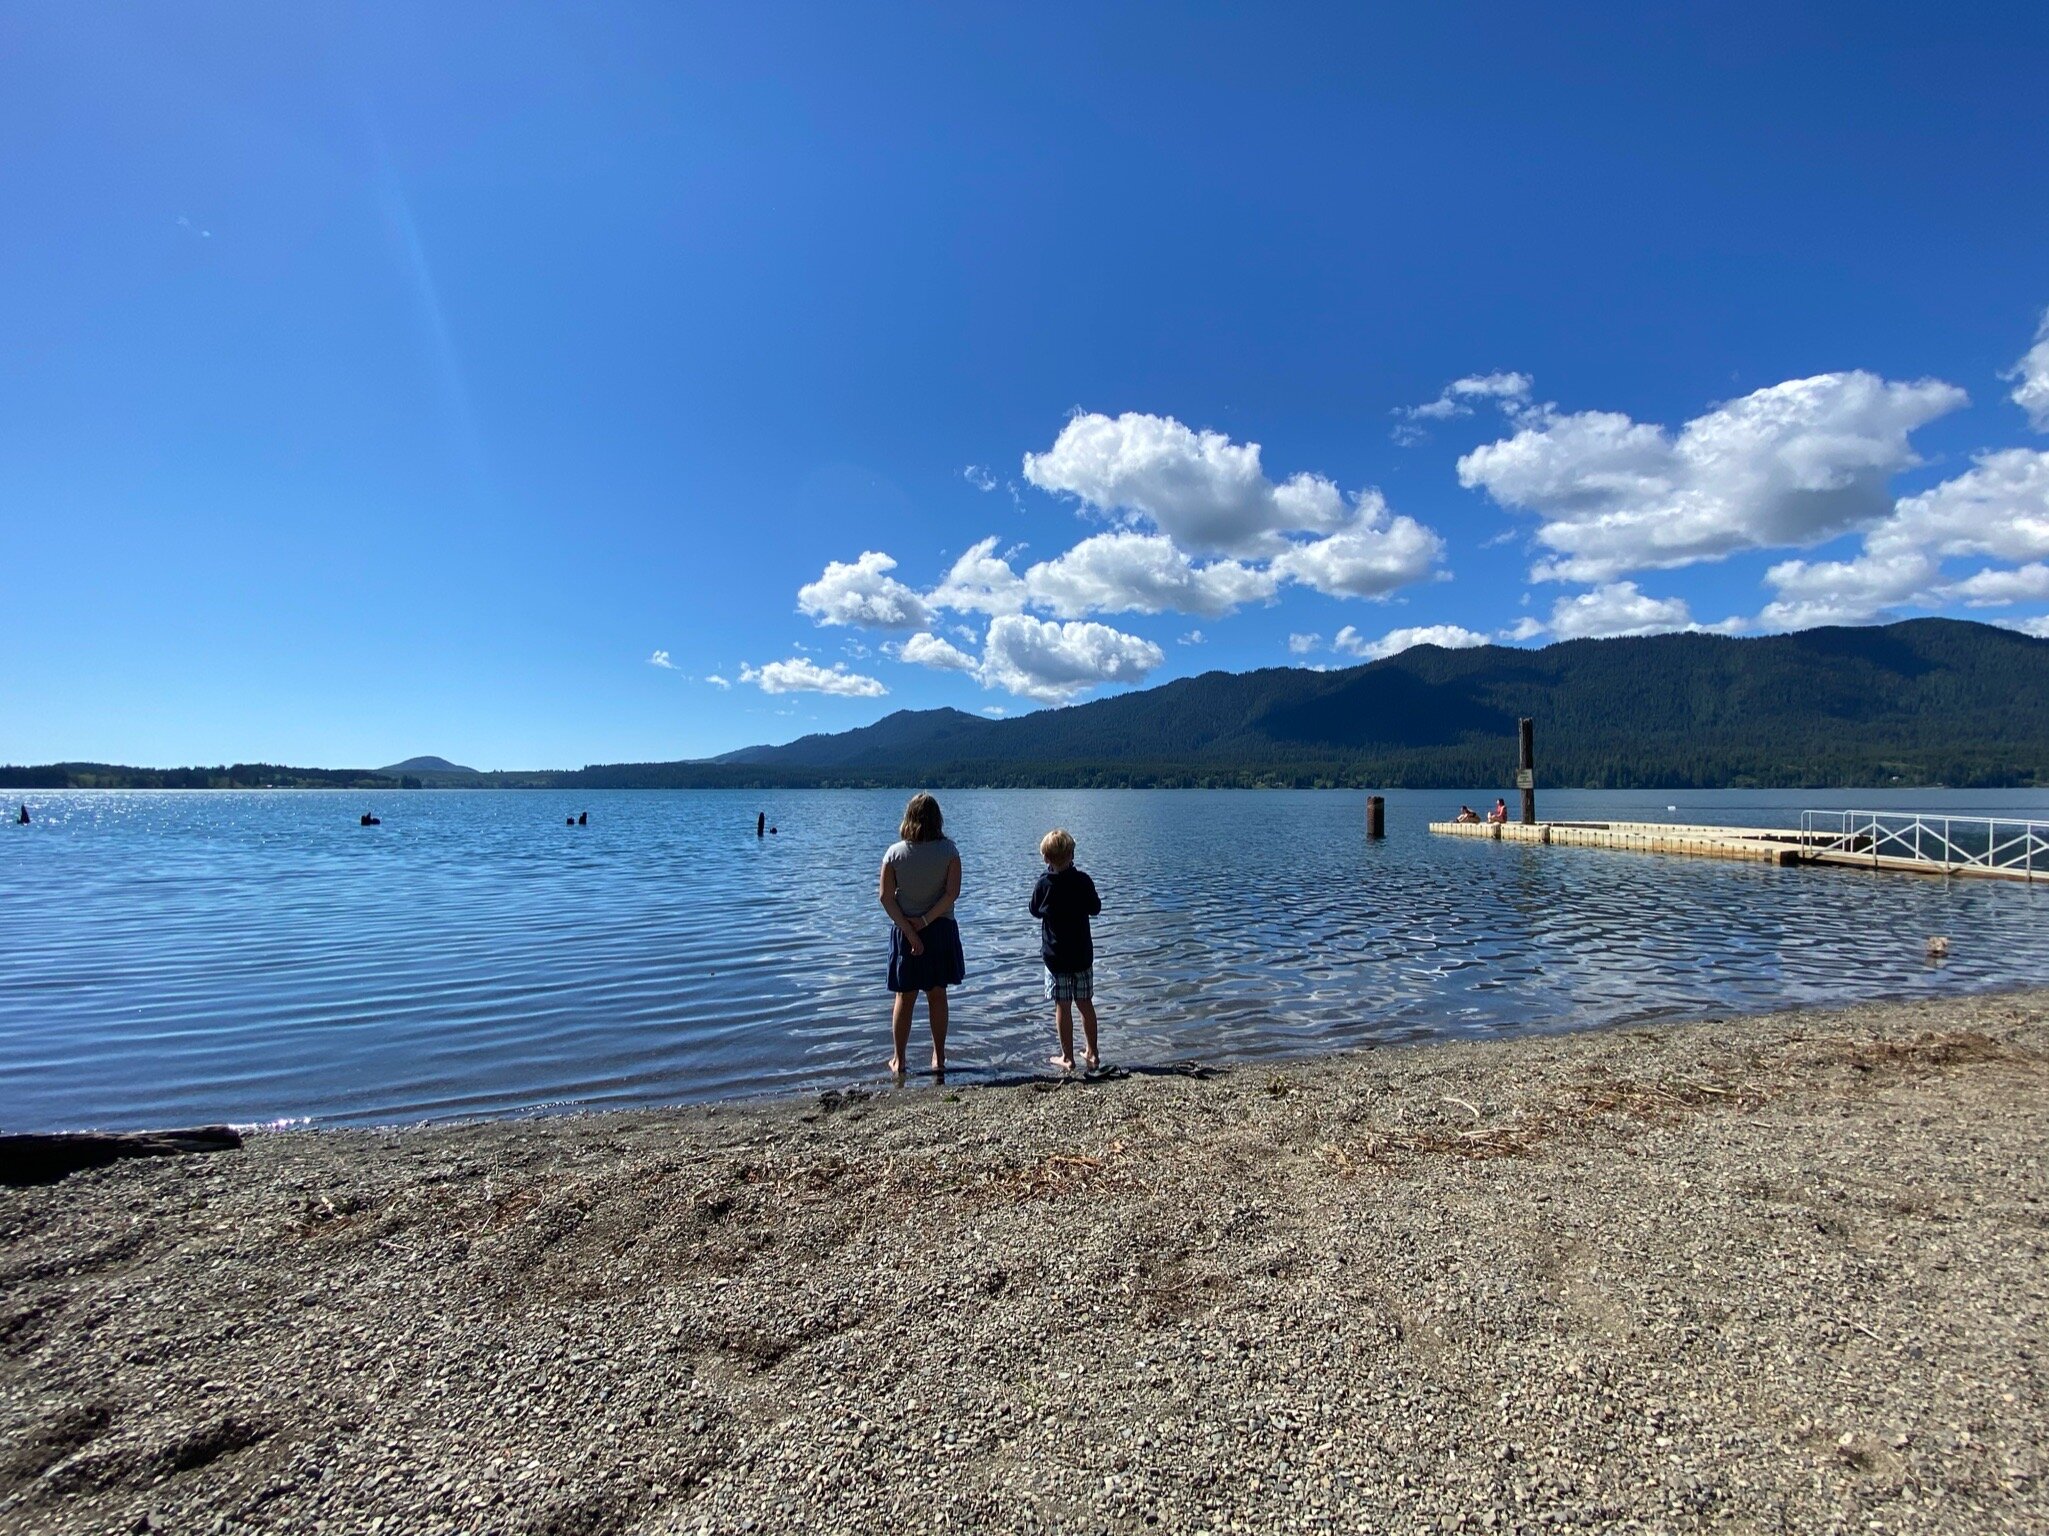 The kids look out over Lake Quinault from the beach at the Lake Quinault Lodge